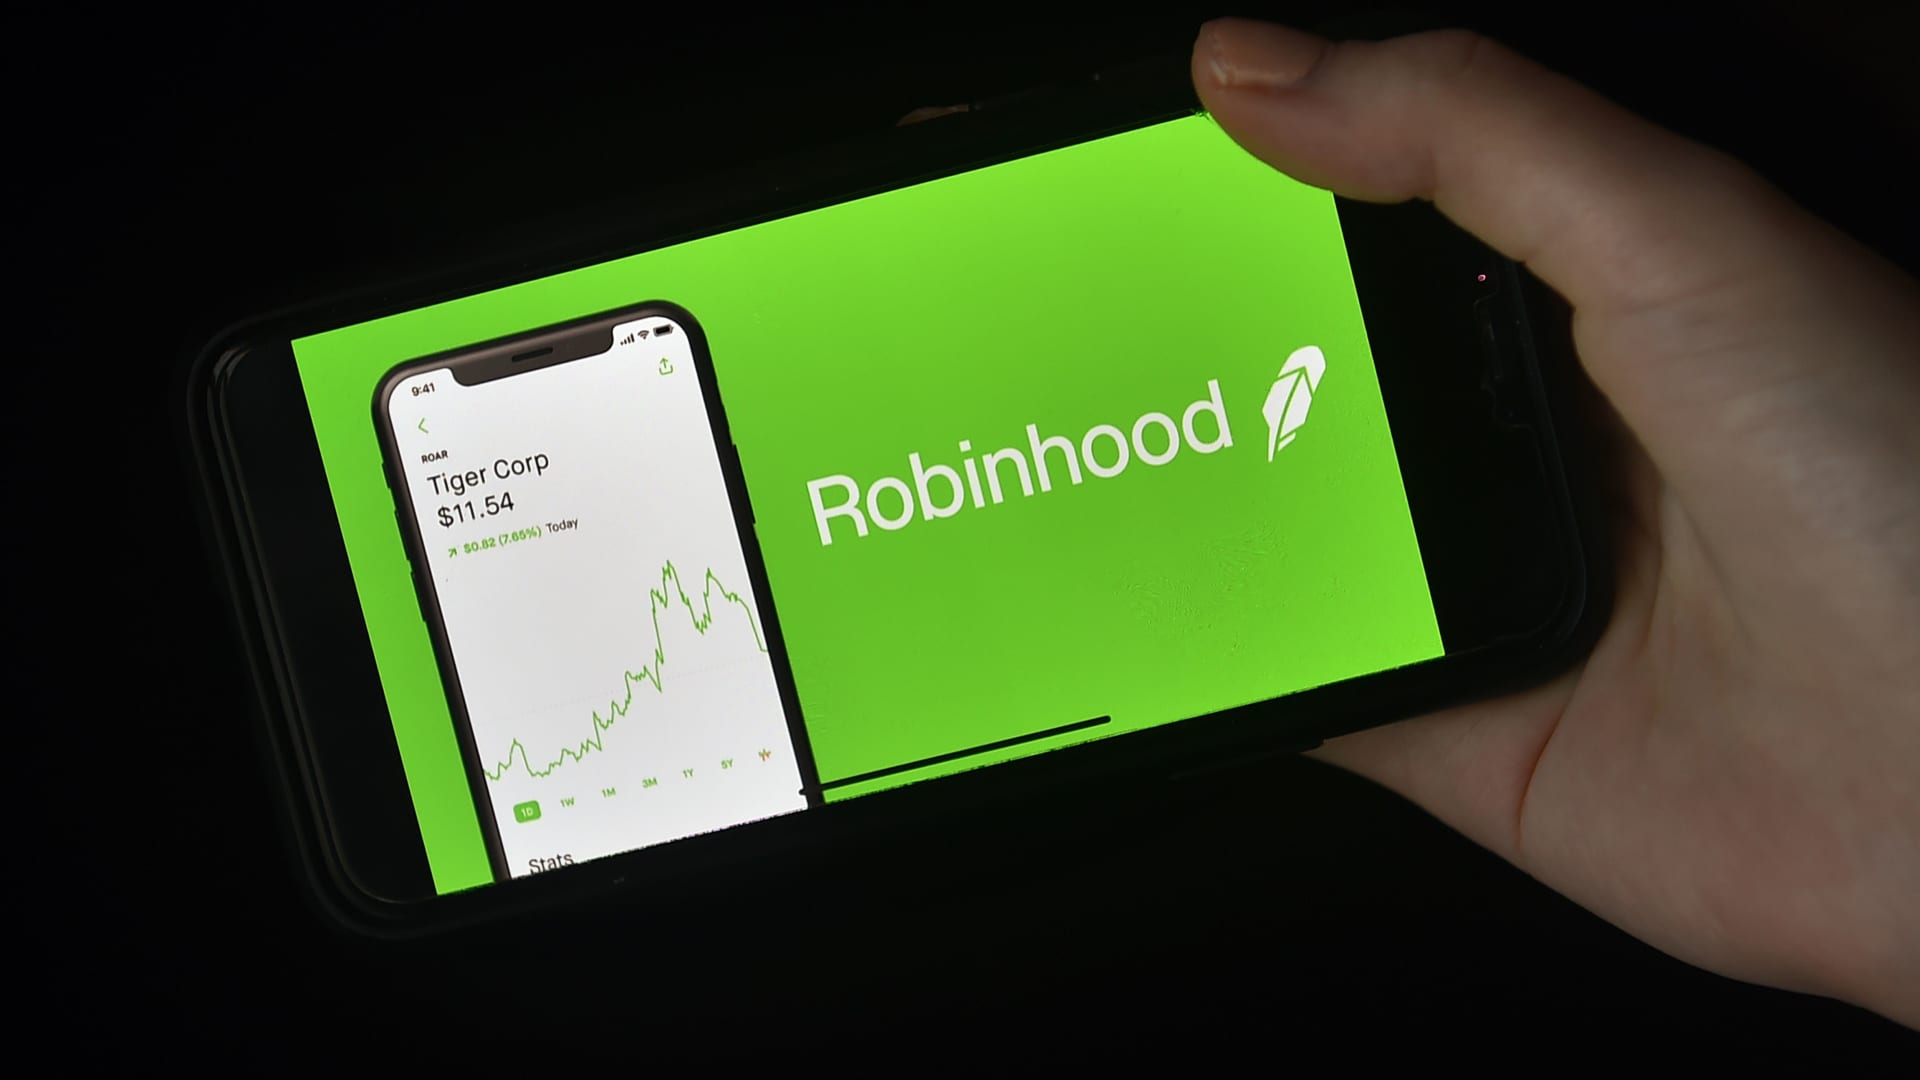 Robinhood has 18 million accounts with $80 billion in assets after rapid growth, IPO filing shows